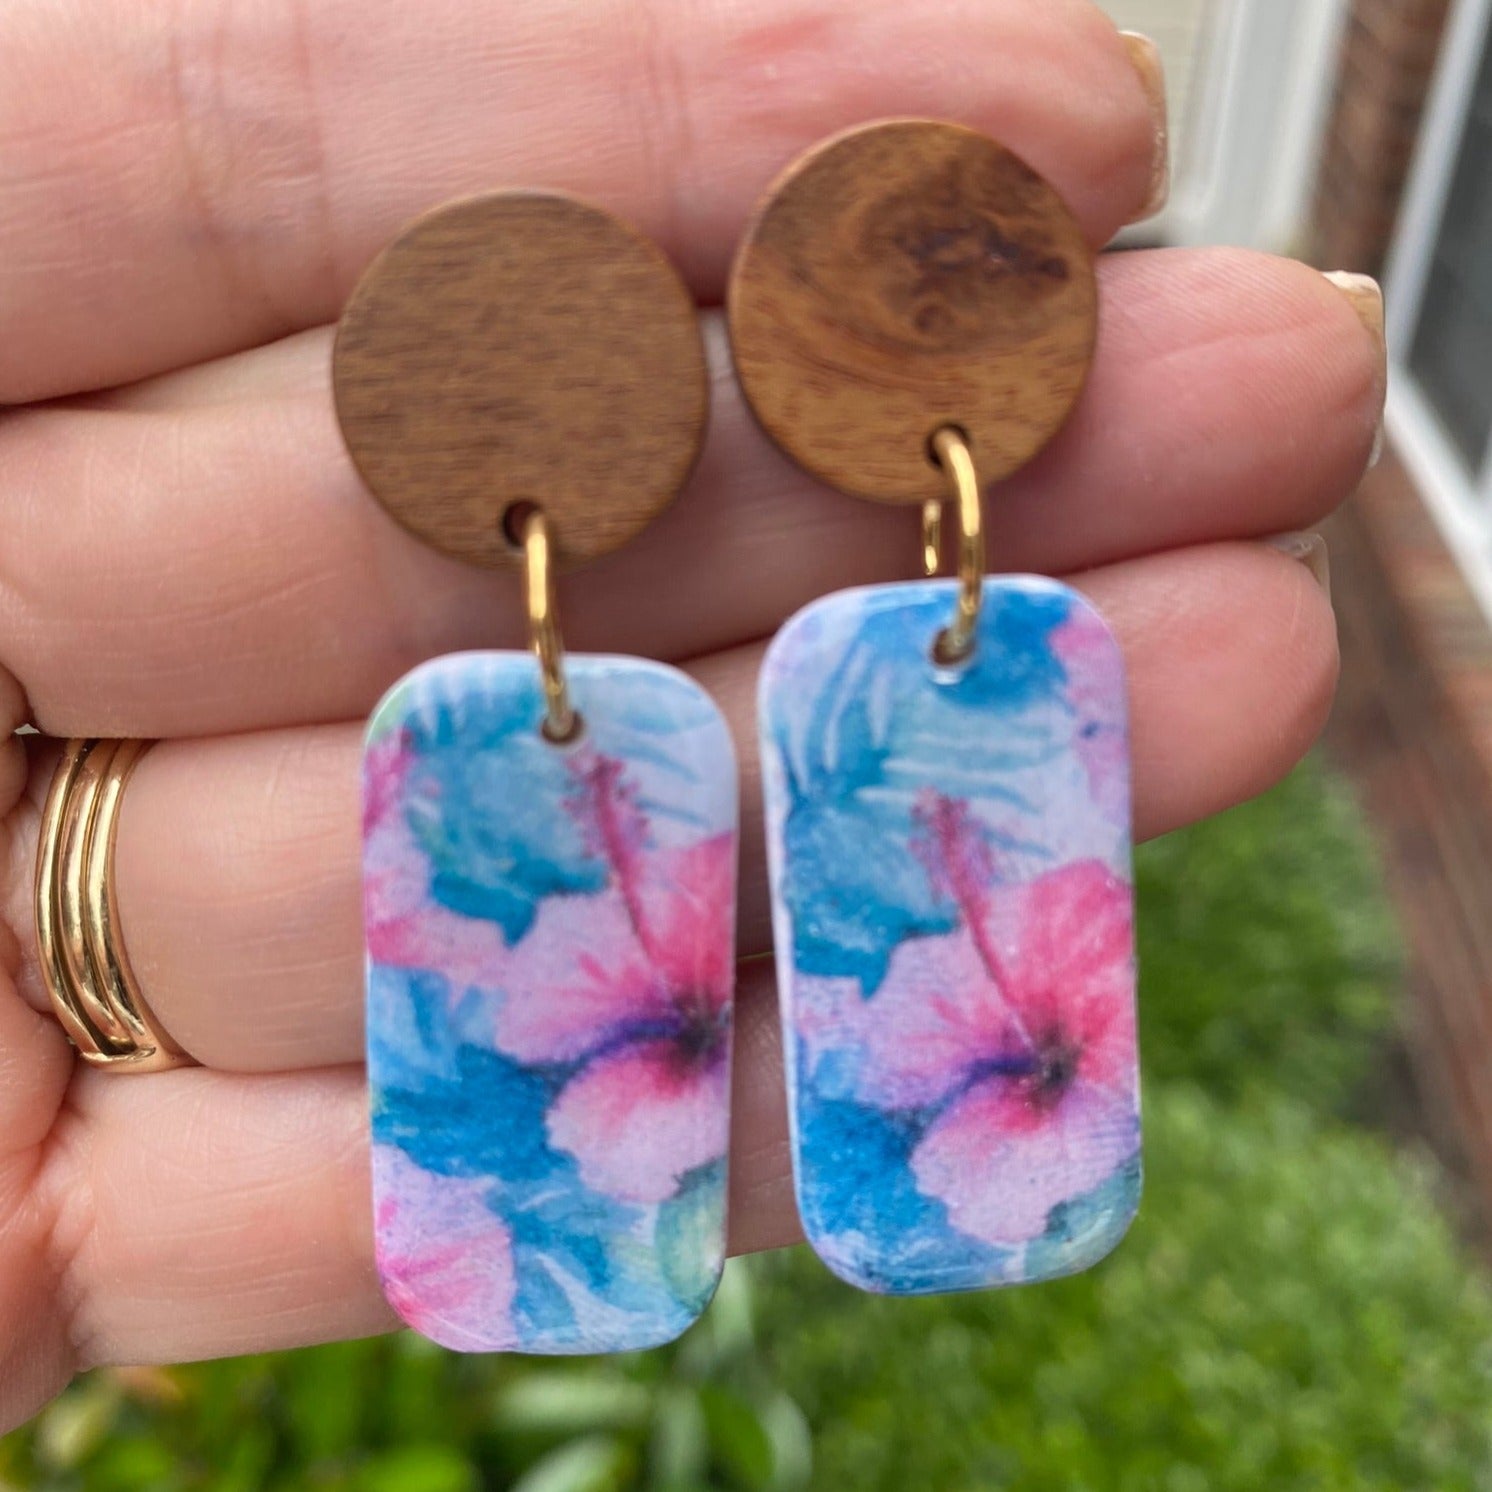 Summertime blue / pink / turquoise blue tropical floral polymer clay dangle earrings